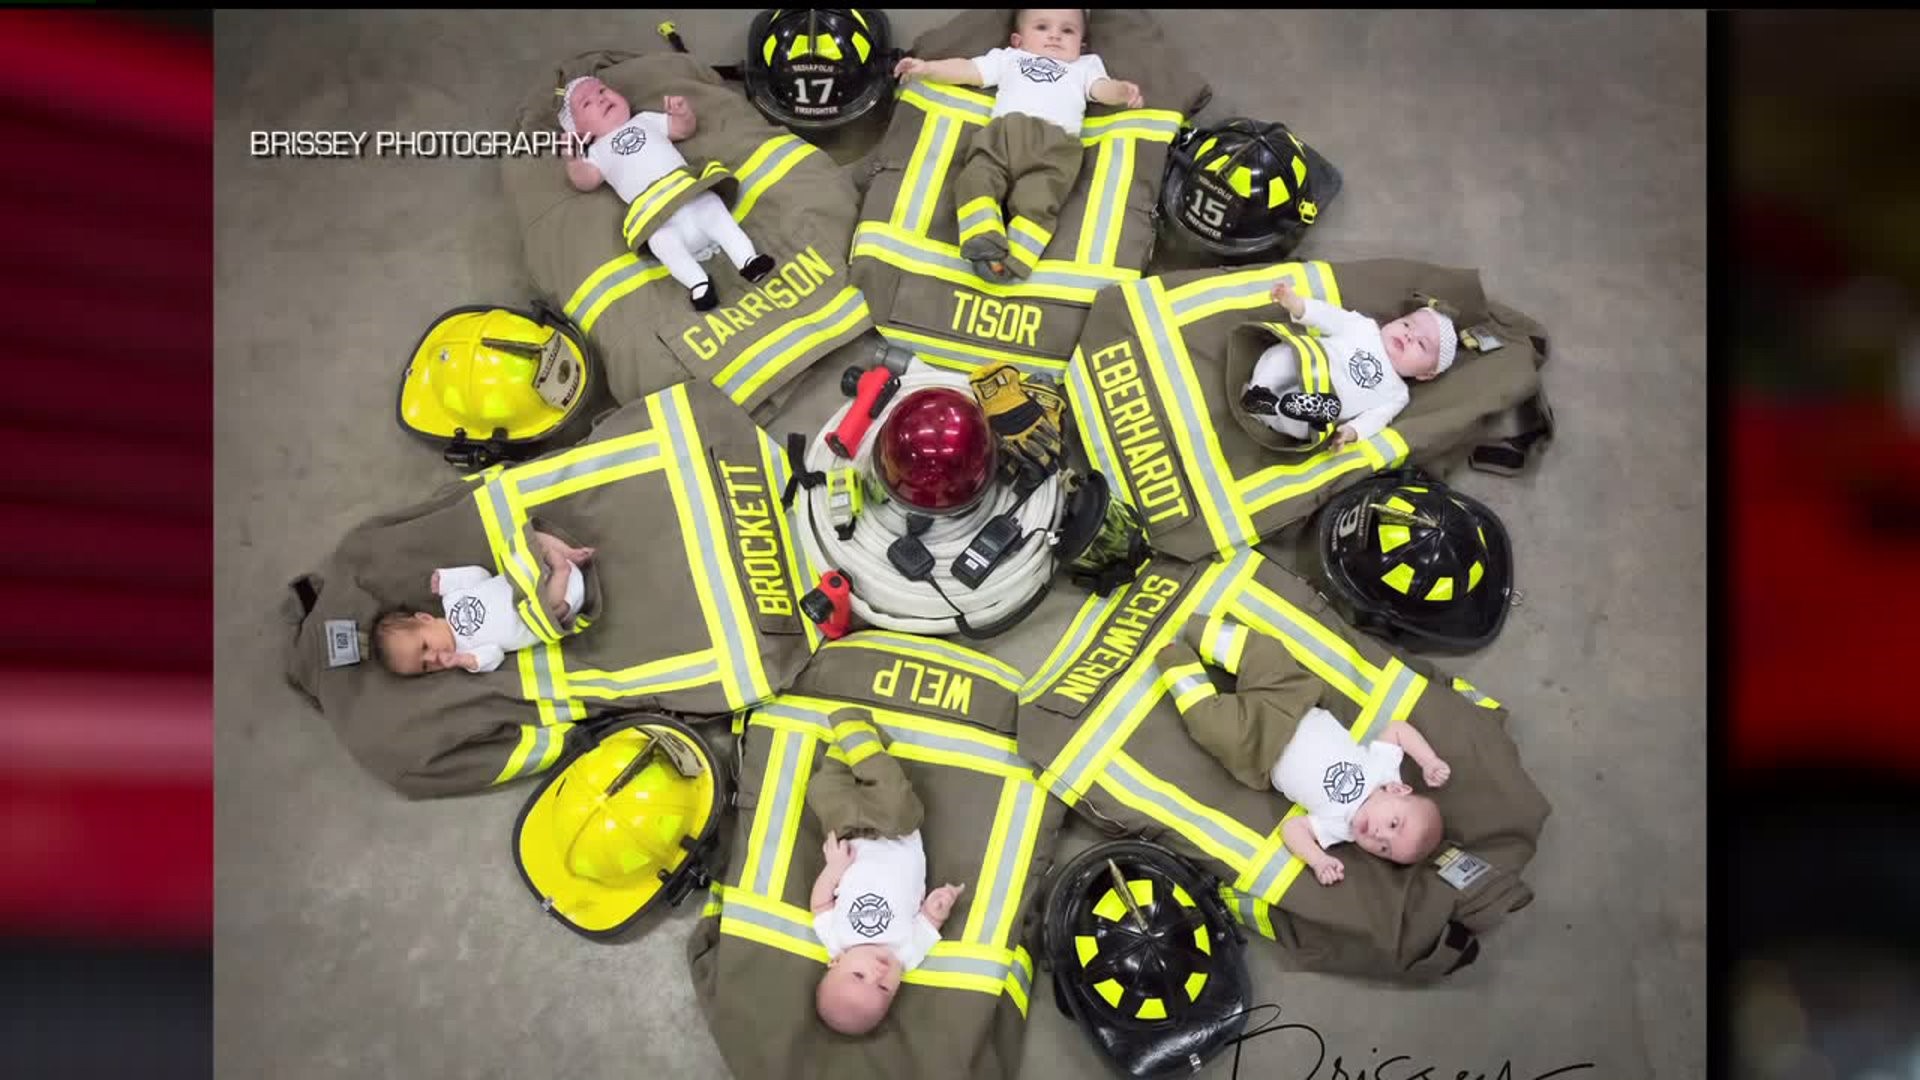 Mediapolis Firefighters have 6 babies in 7 months